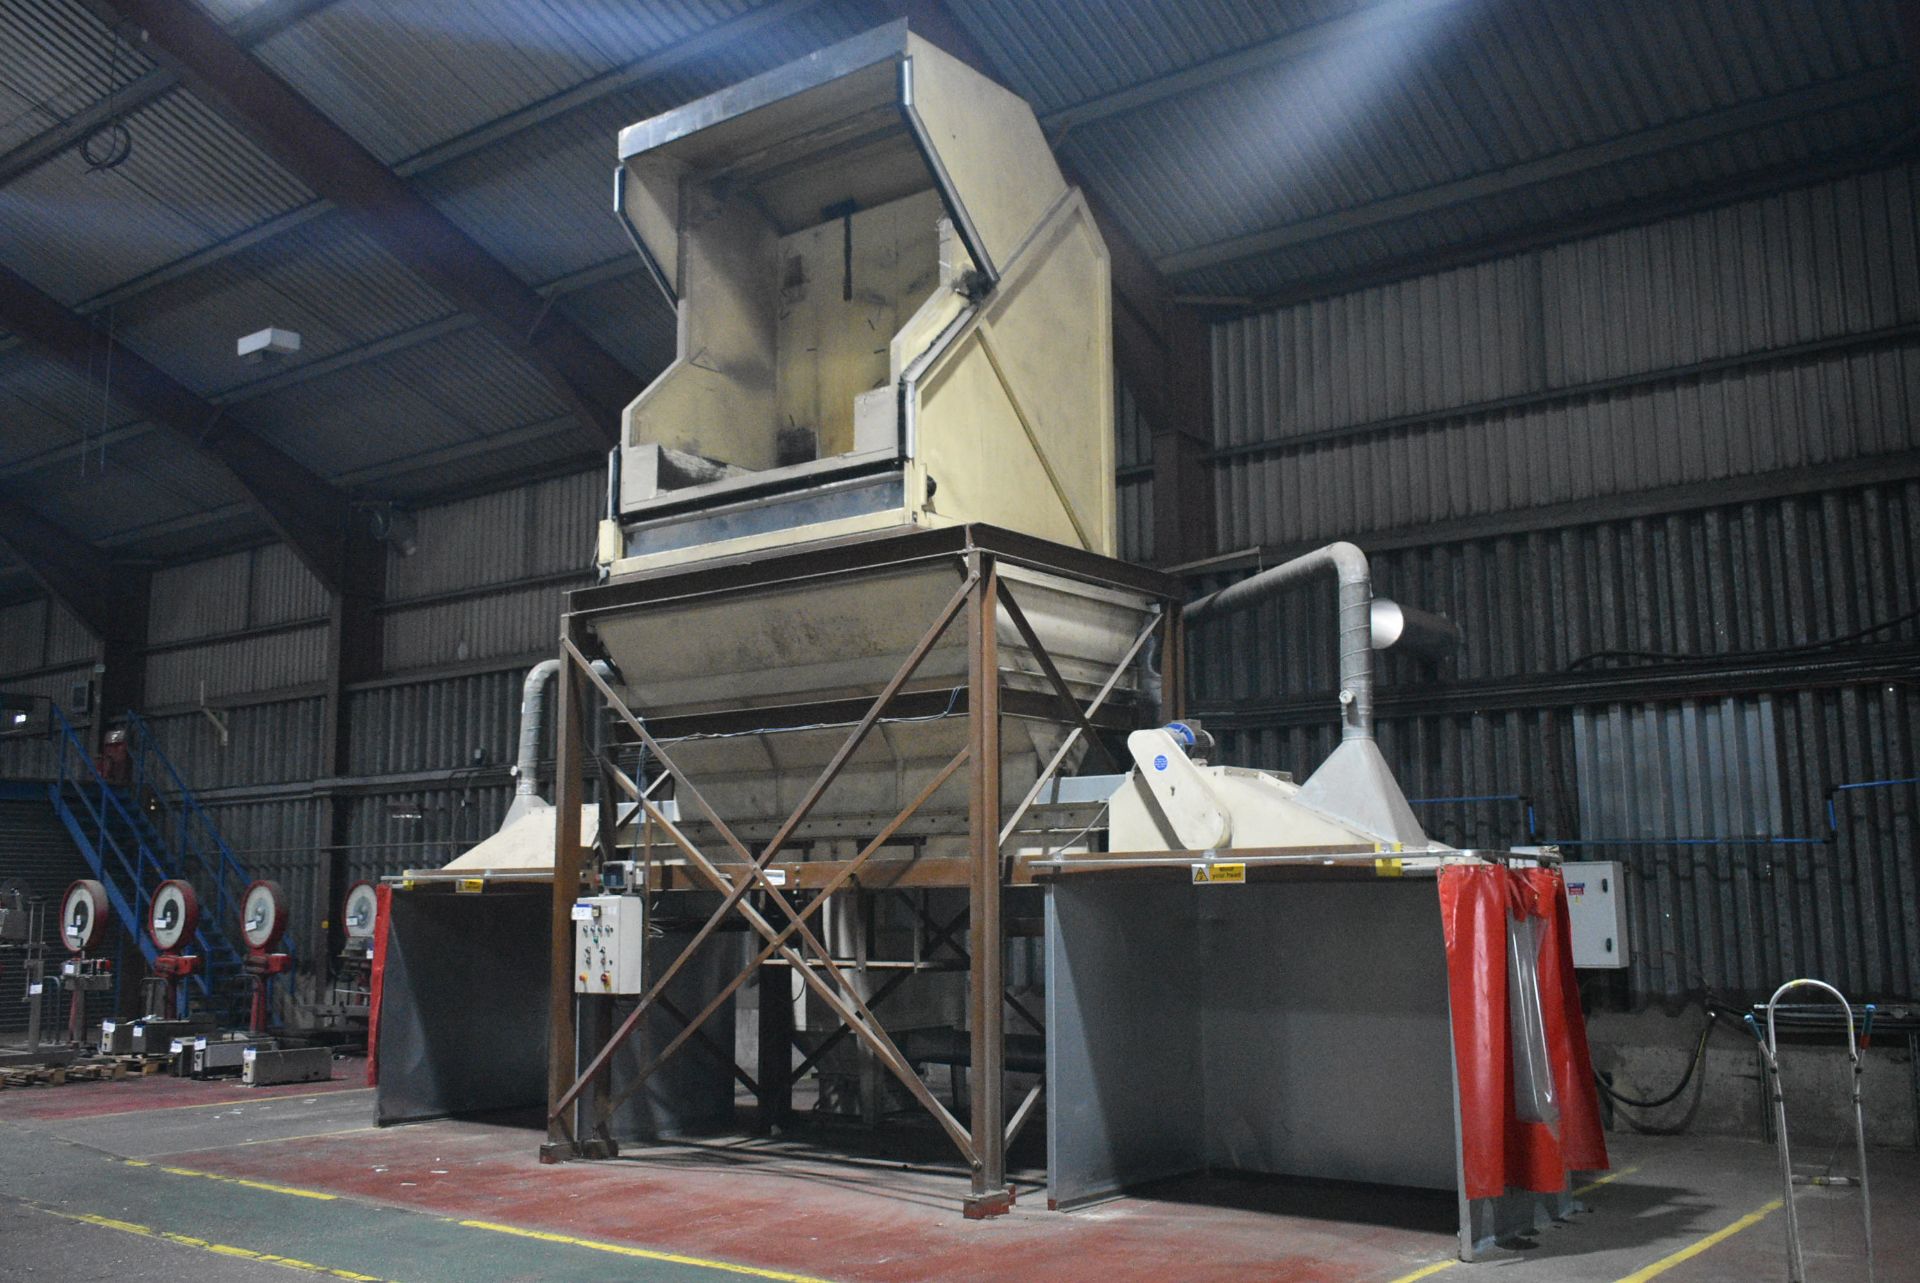 1500kg capacity LOSS IN WEIGHT WEIGHER, approx. 8.5m x 2.2m x 6.8m total footprint, with bin tippler - Image 2 of 7